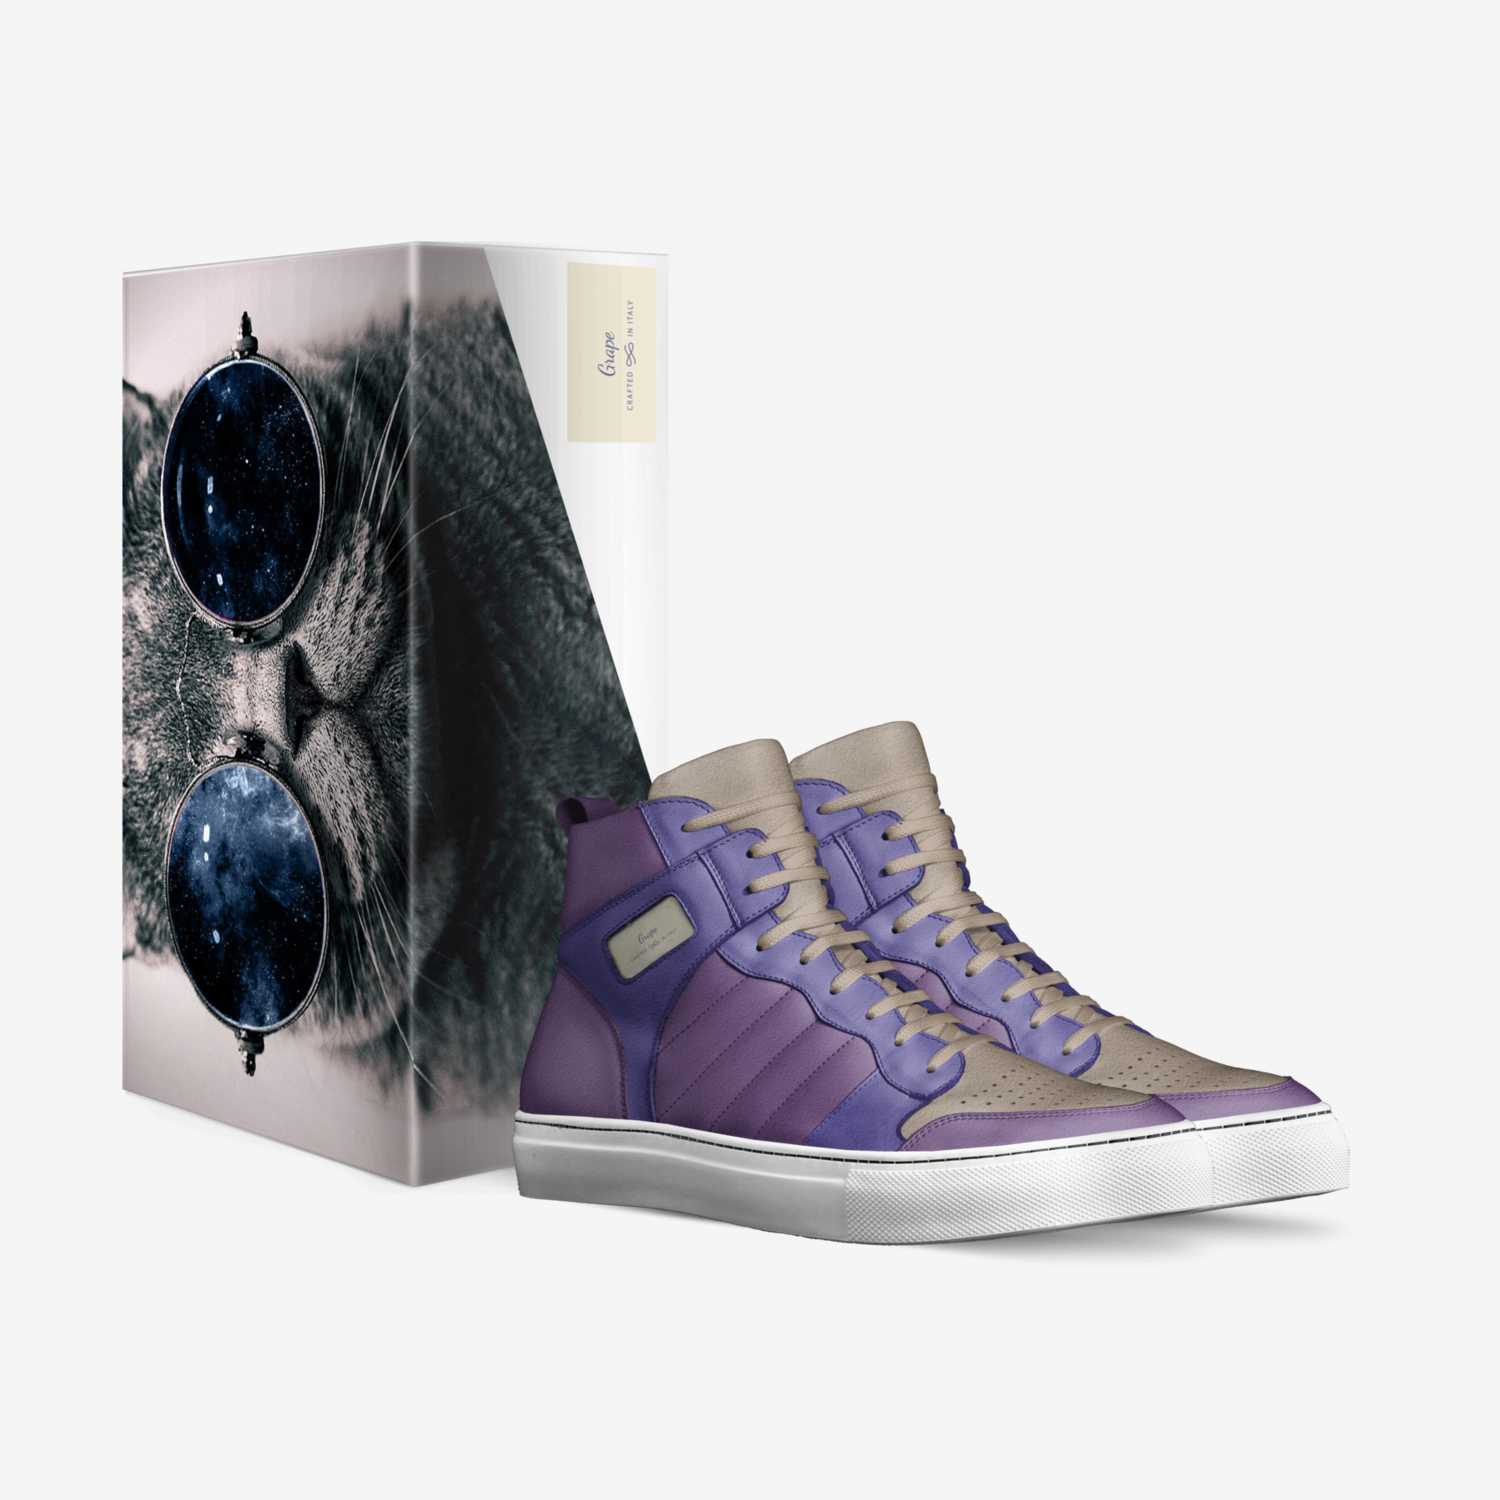 Grape custom made in Italy shoes by Grape Soda | Box view